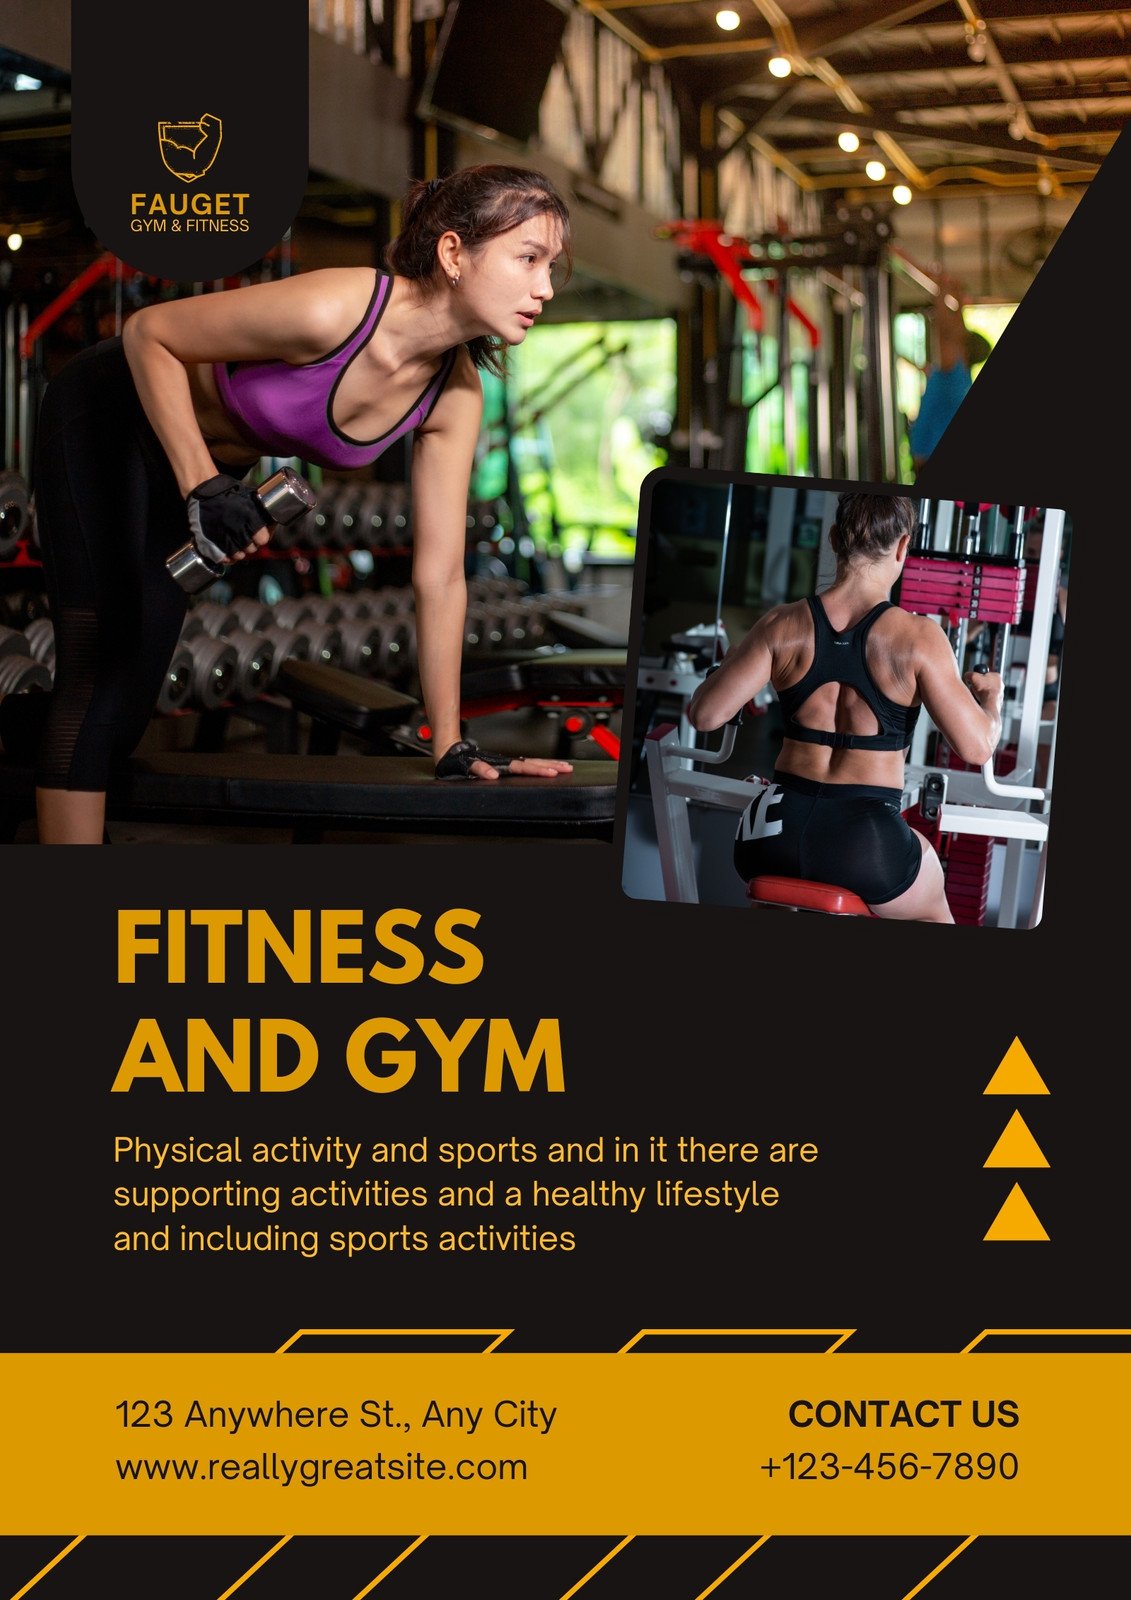 Gym / Fitness Flyer Template Graphic by Hiumorfaruk0909 · Creative